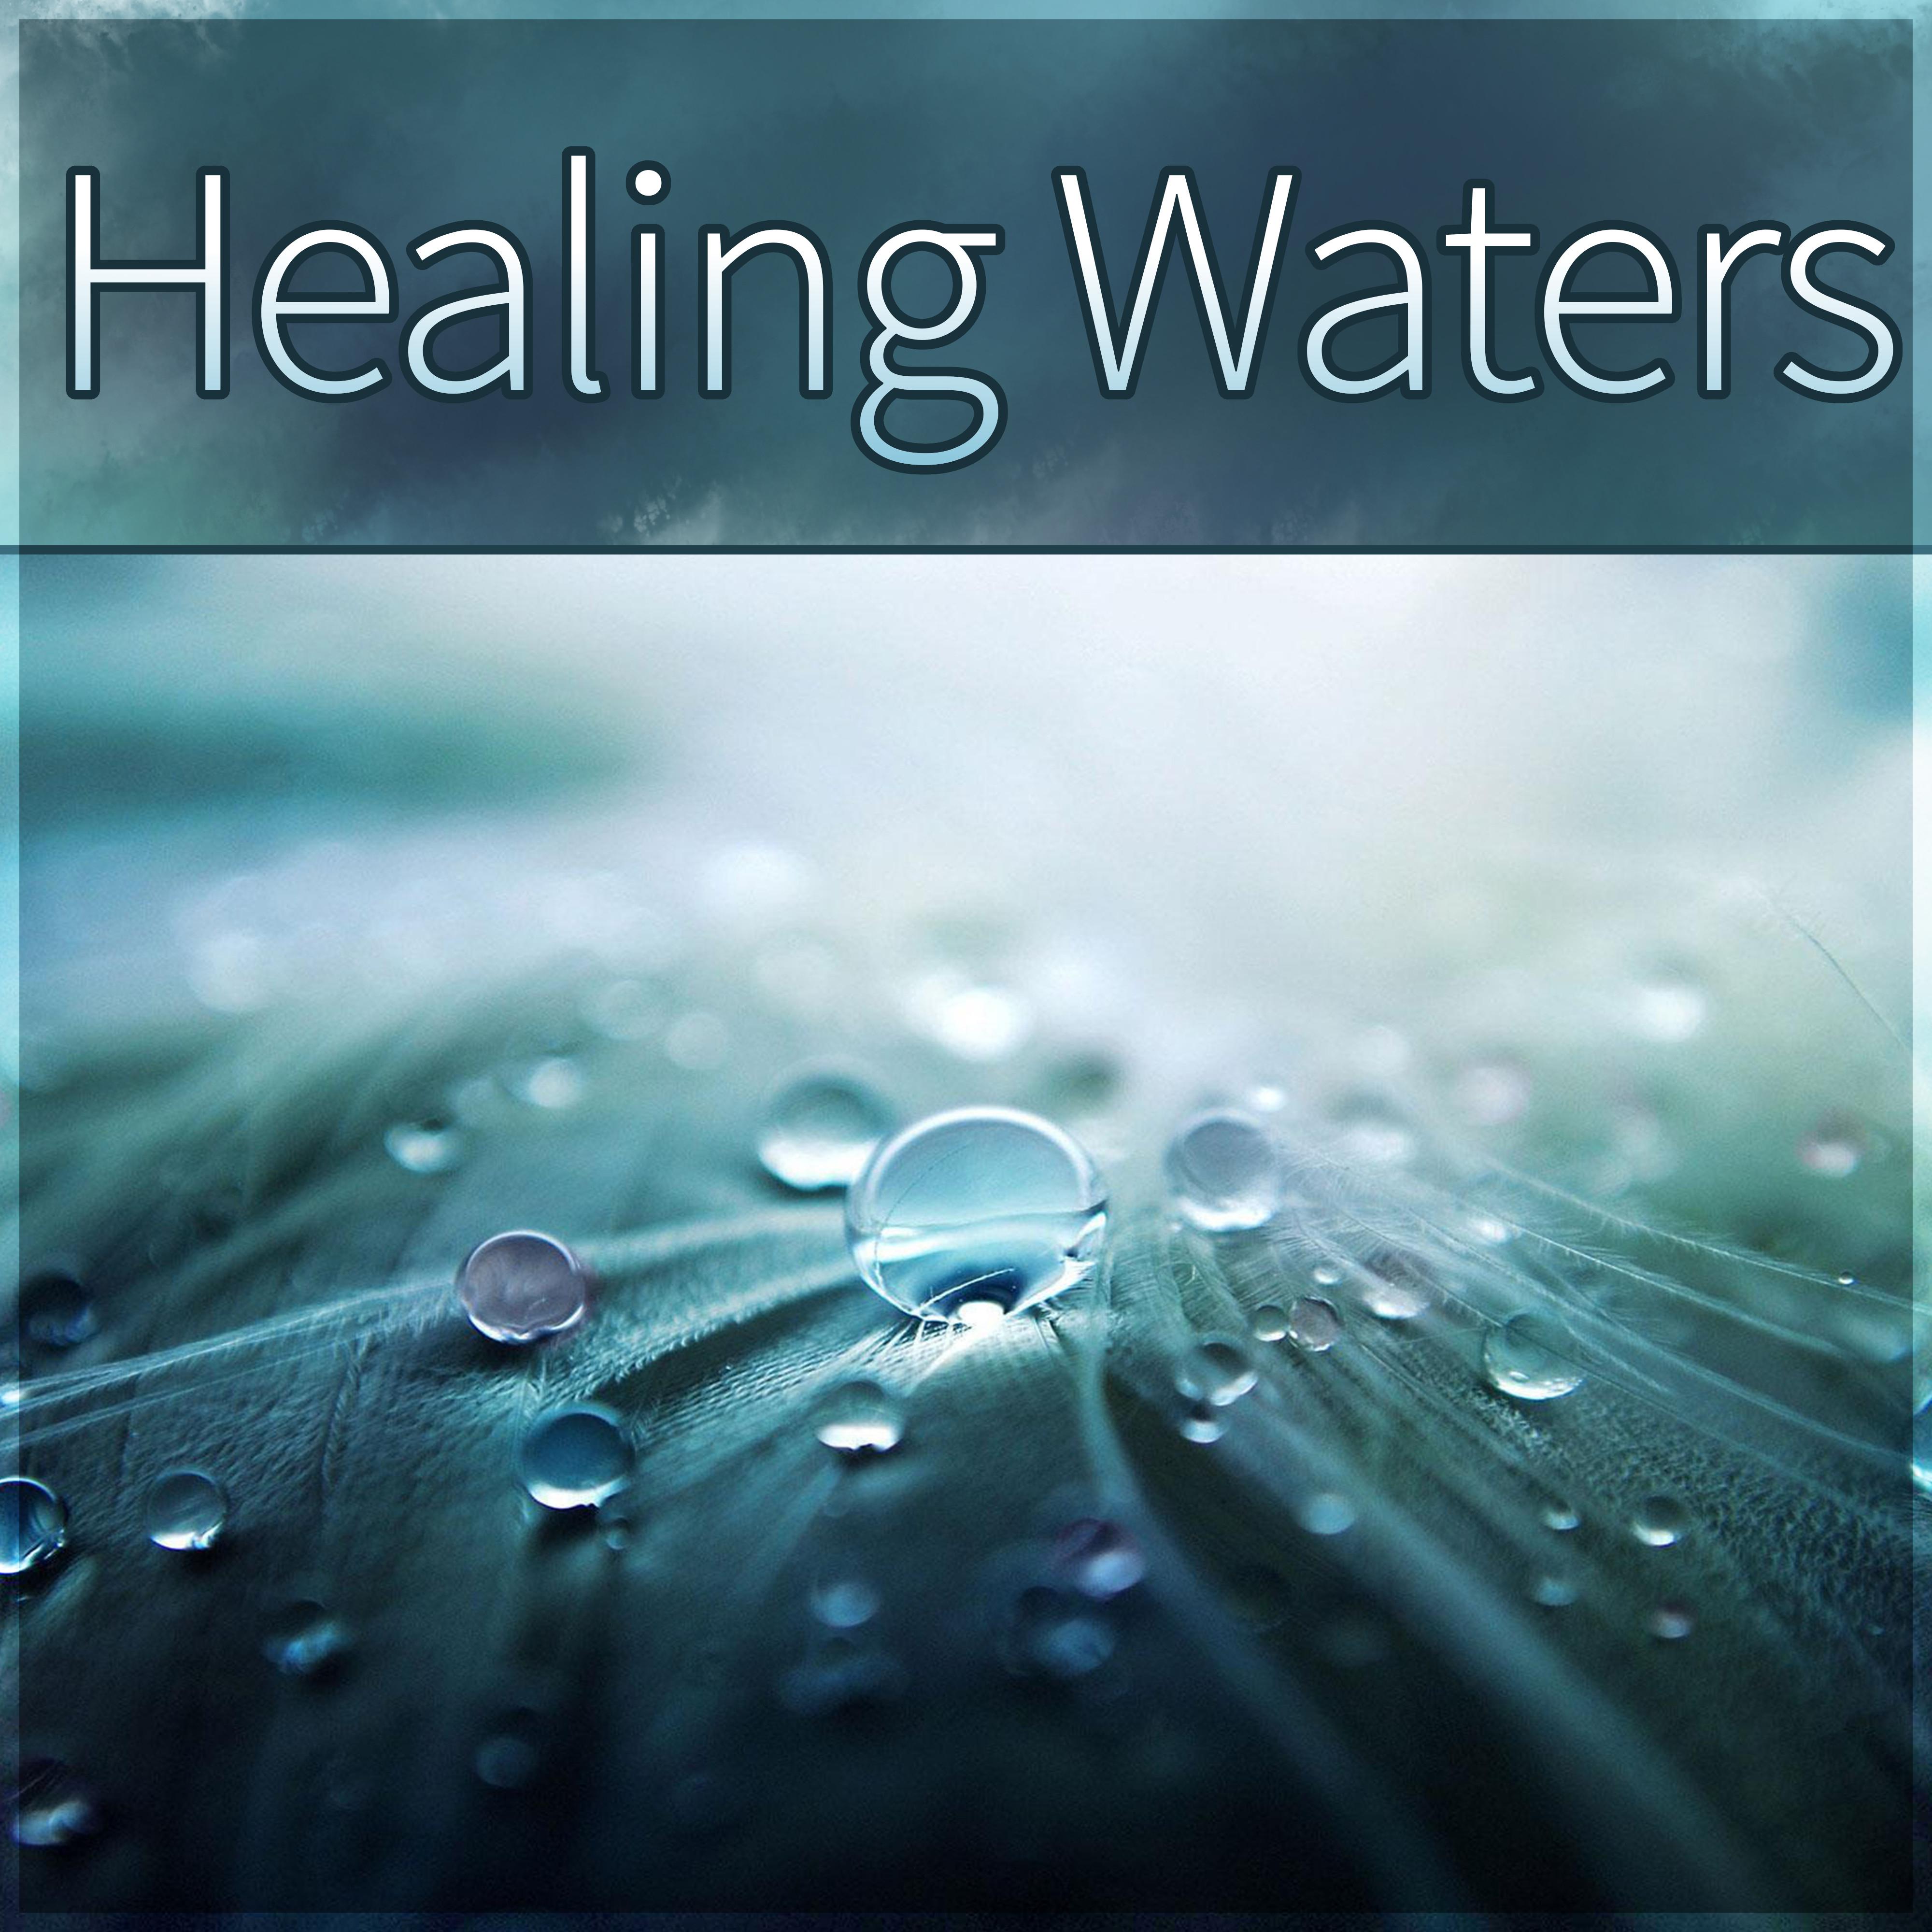 Healing Waters - Soothing Music, Nature Music for Healing Through Sound and Touch, Sensual Massage Music for Aromatherapy, Reiki Healing, Finest Chill Out & Lounge Music